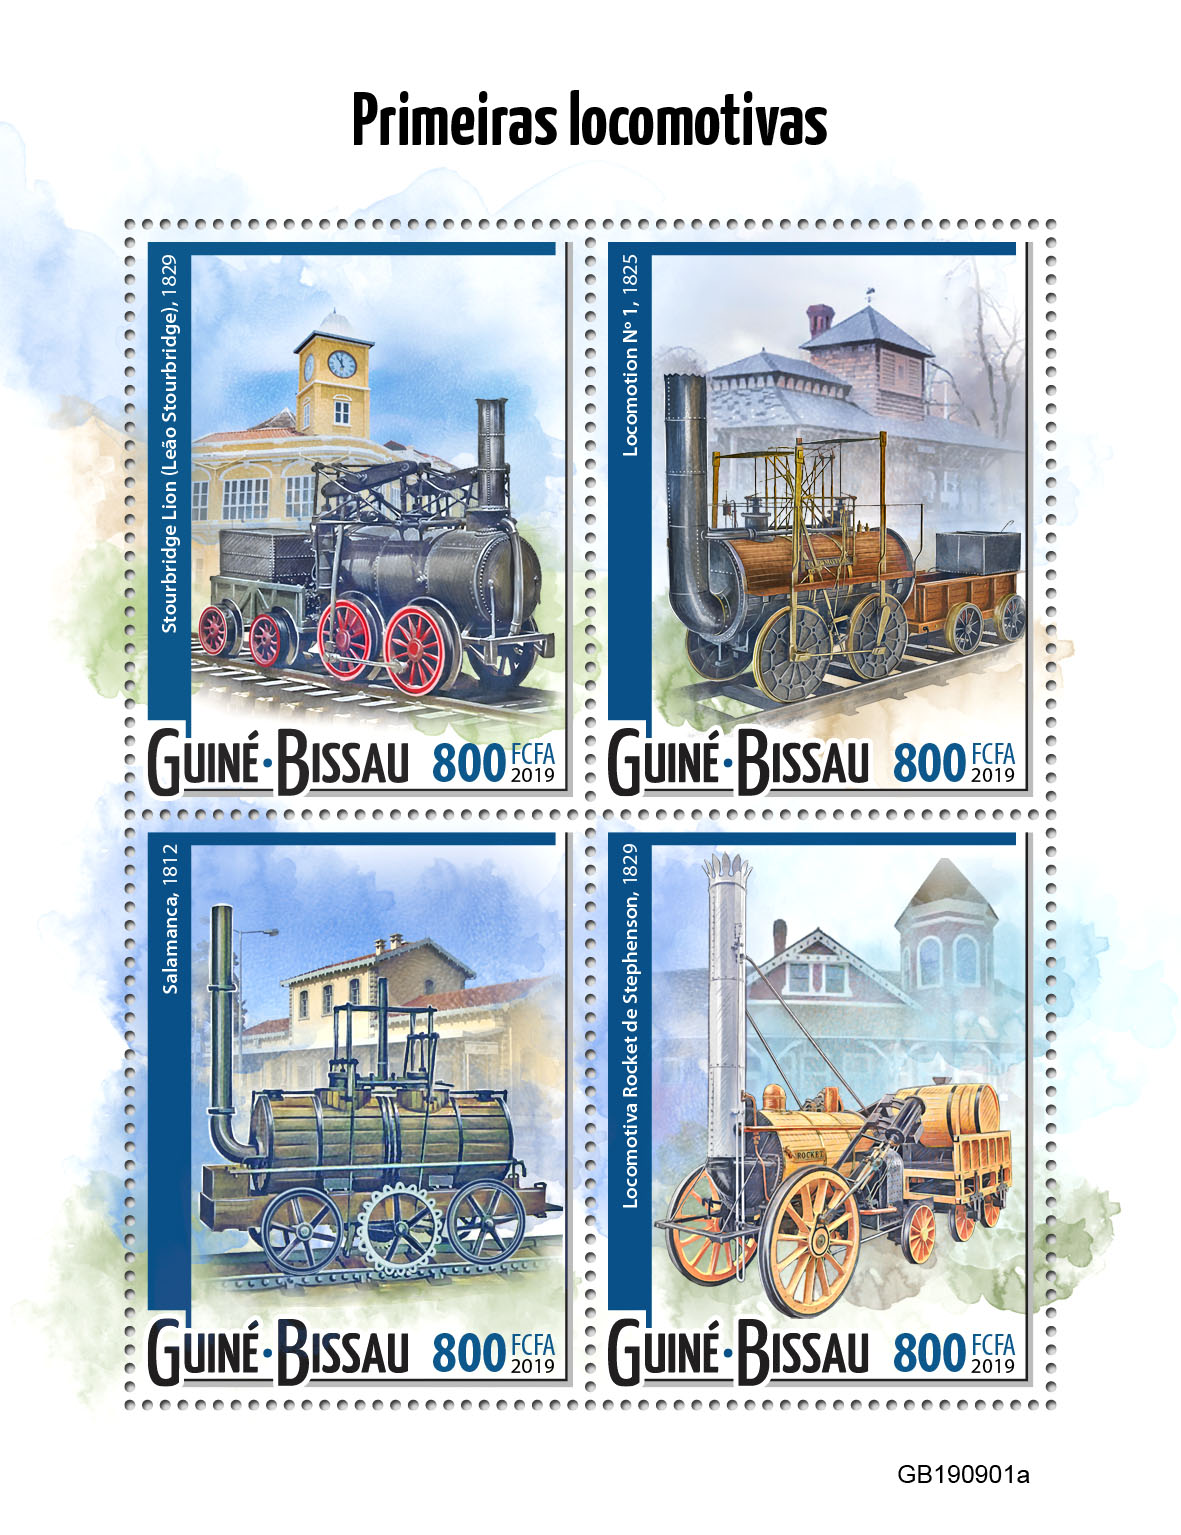 First trains - Issue of Guinée-Bissau postage stamps